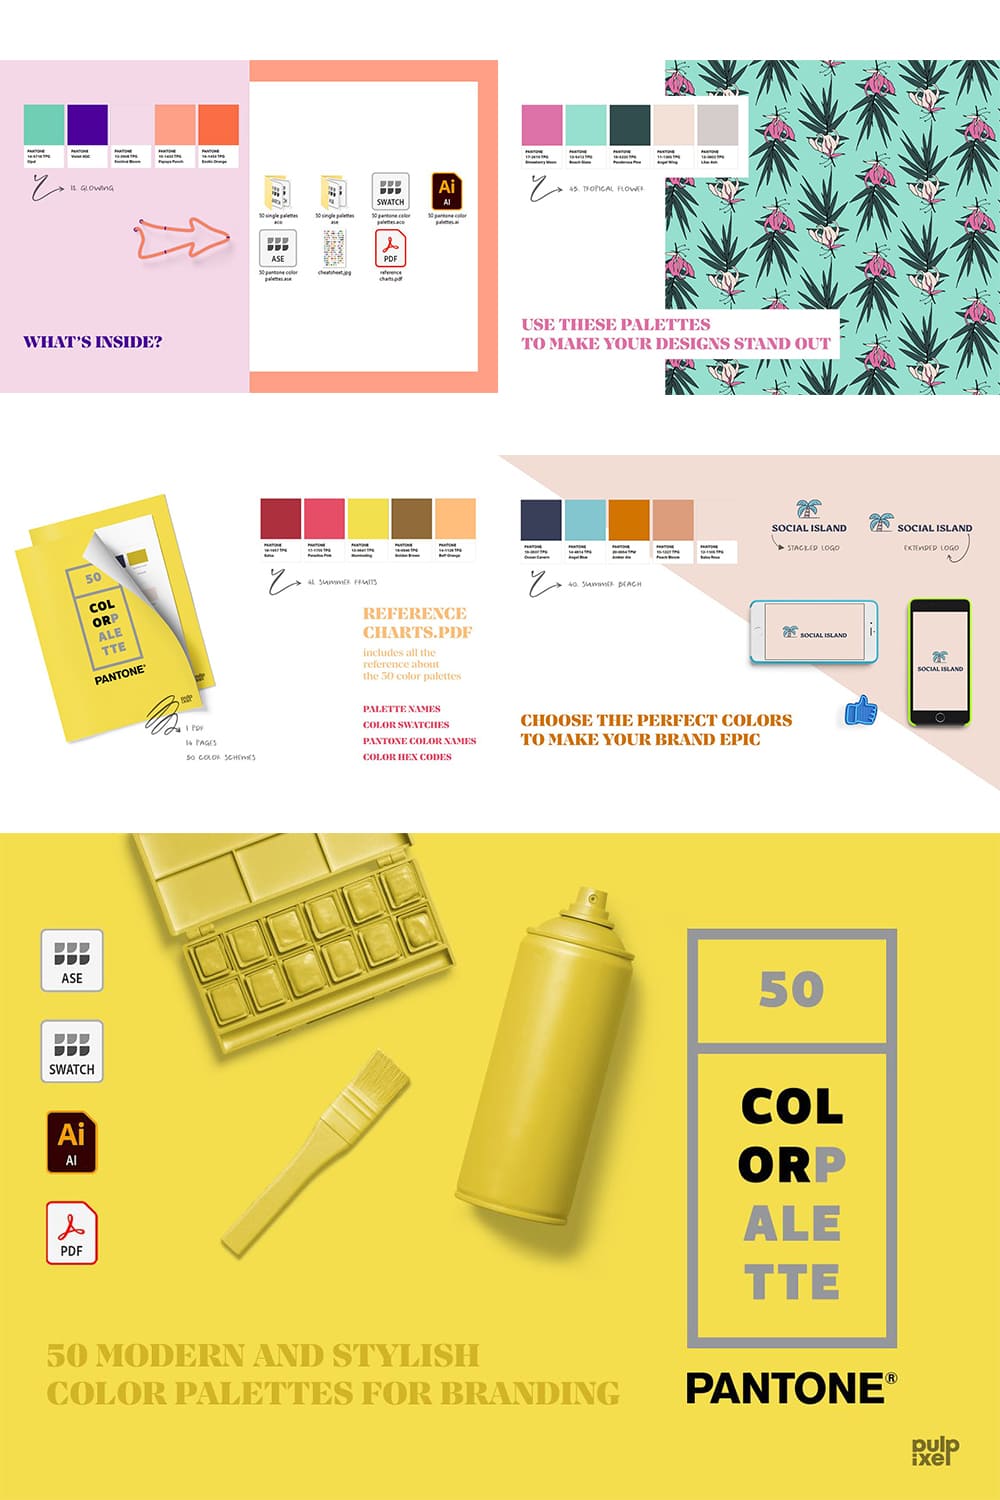 50 Pantone Branding Color Palettes - "Use These Palettes To Make Your Designs Stand Out".